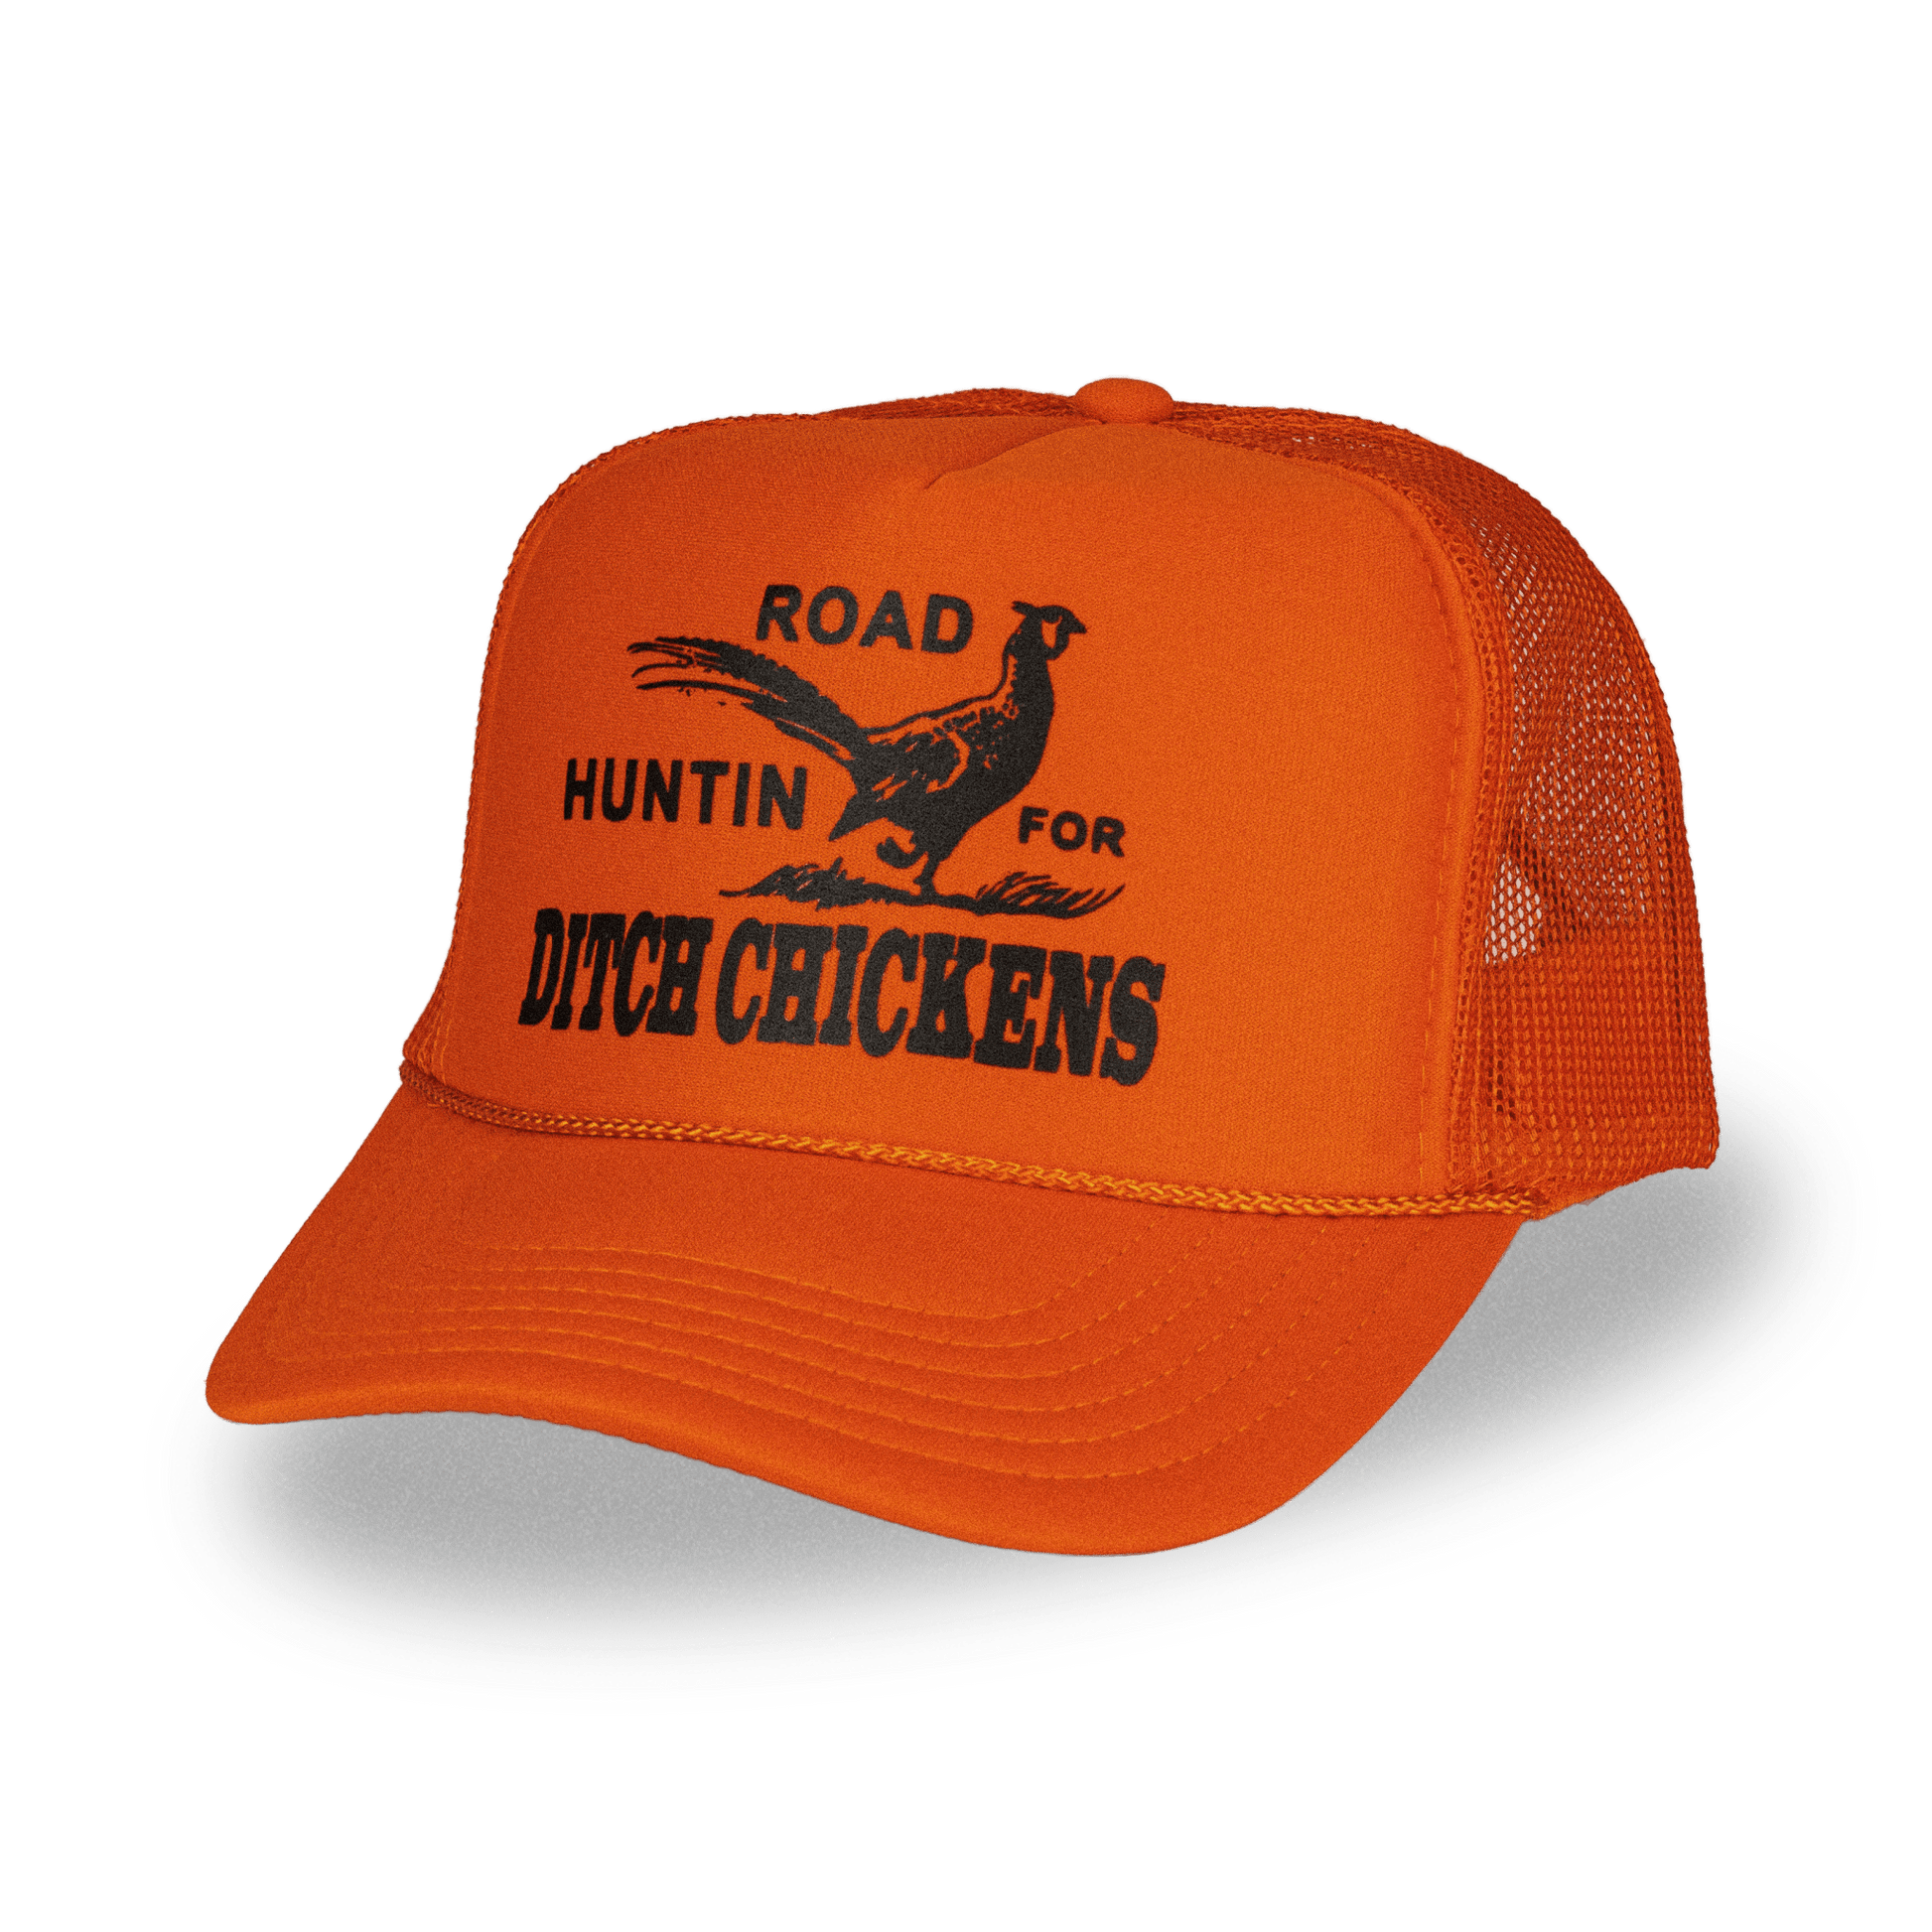 Ditch Chickens Hat - You Betcha